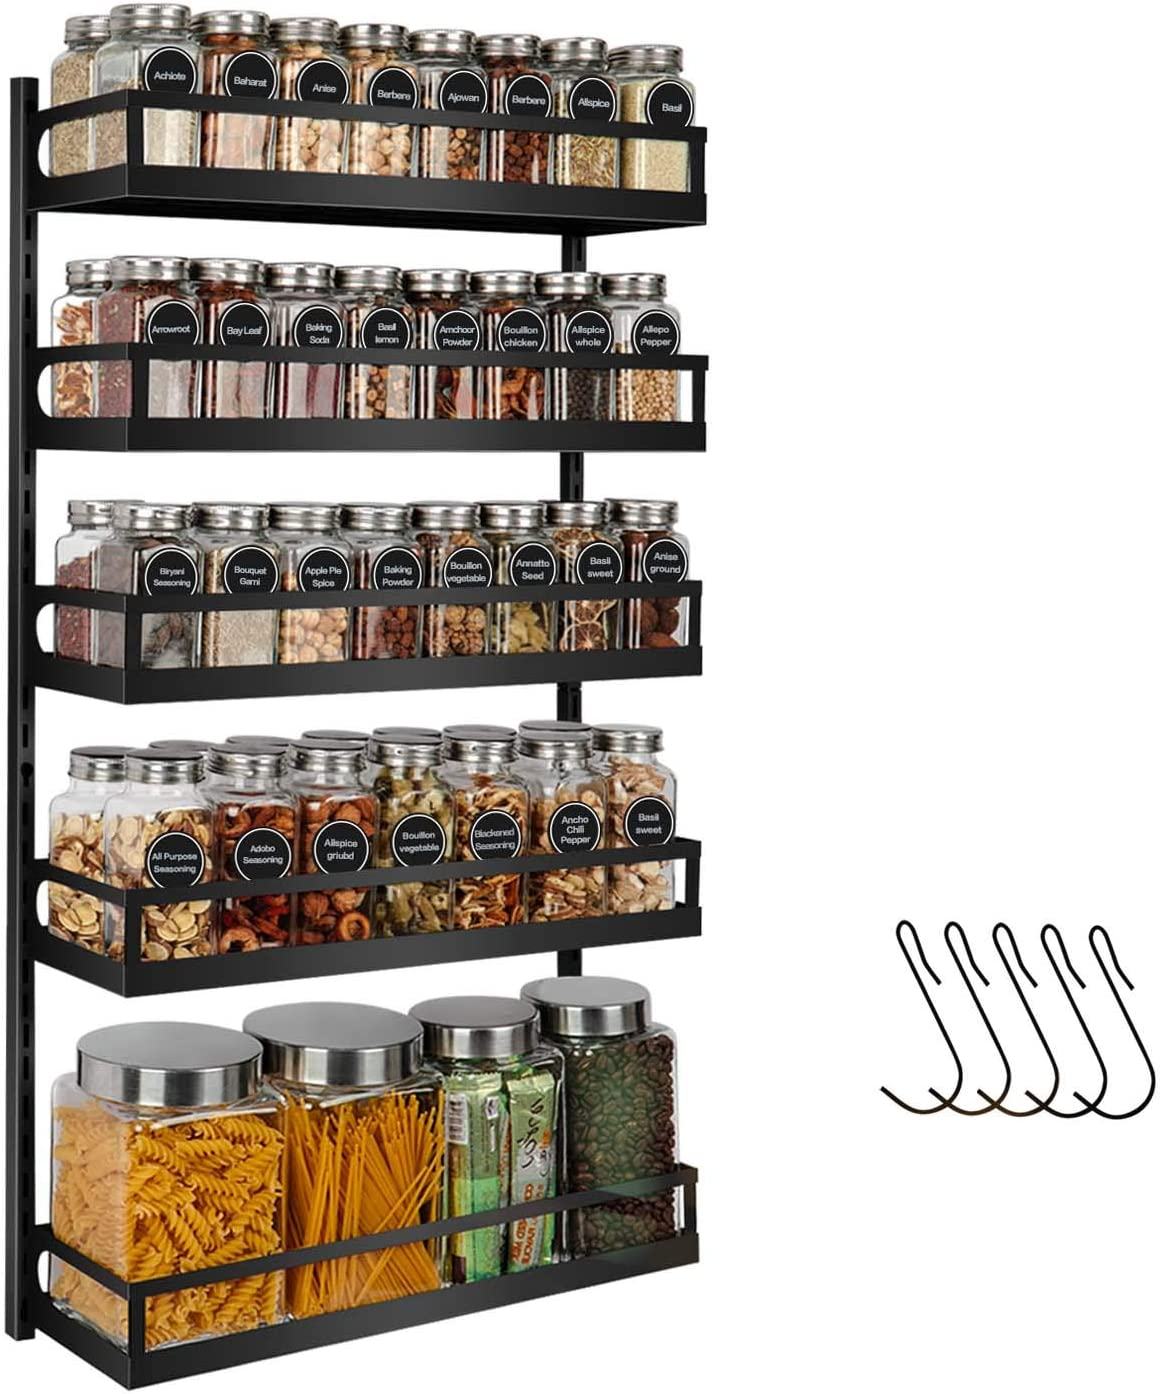 A spice rack for mounting on a pantry door.